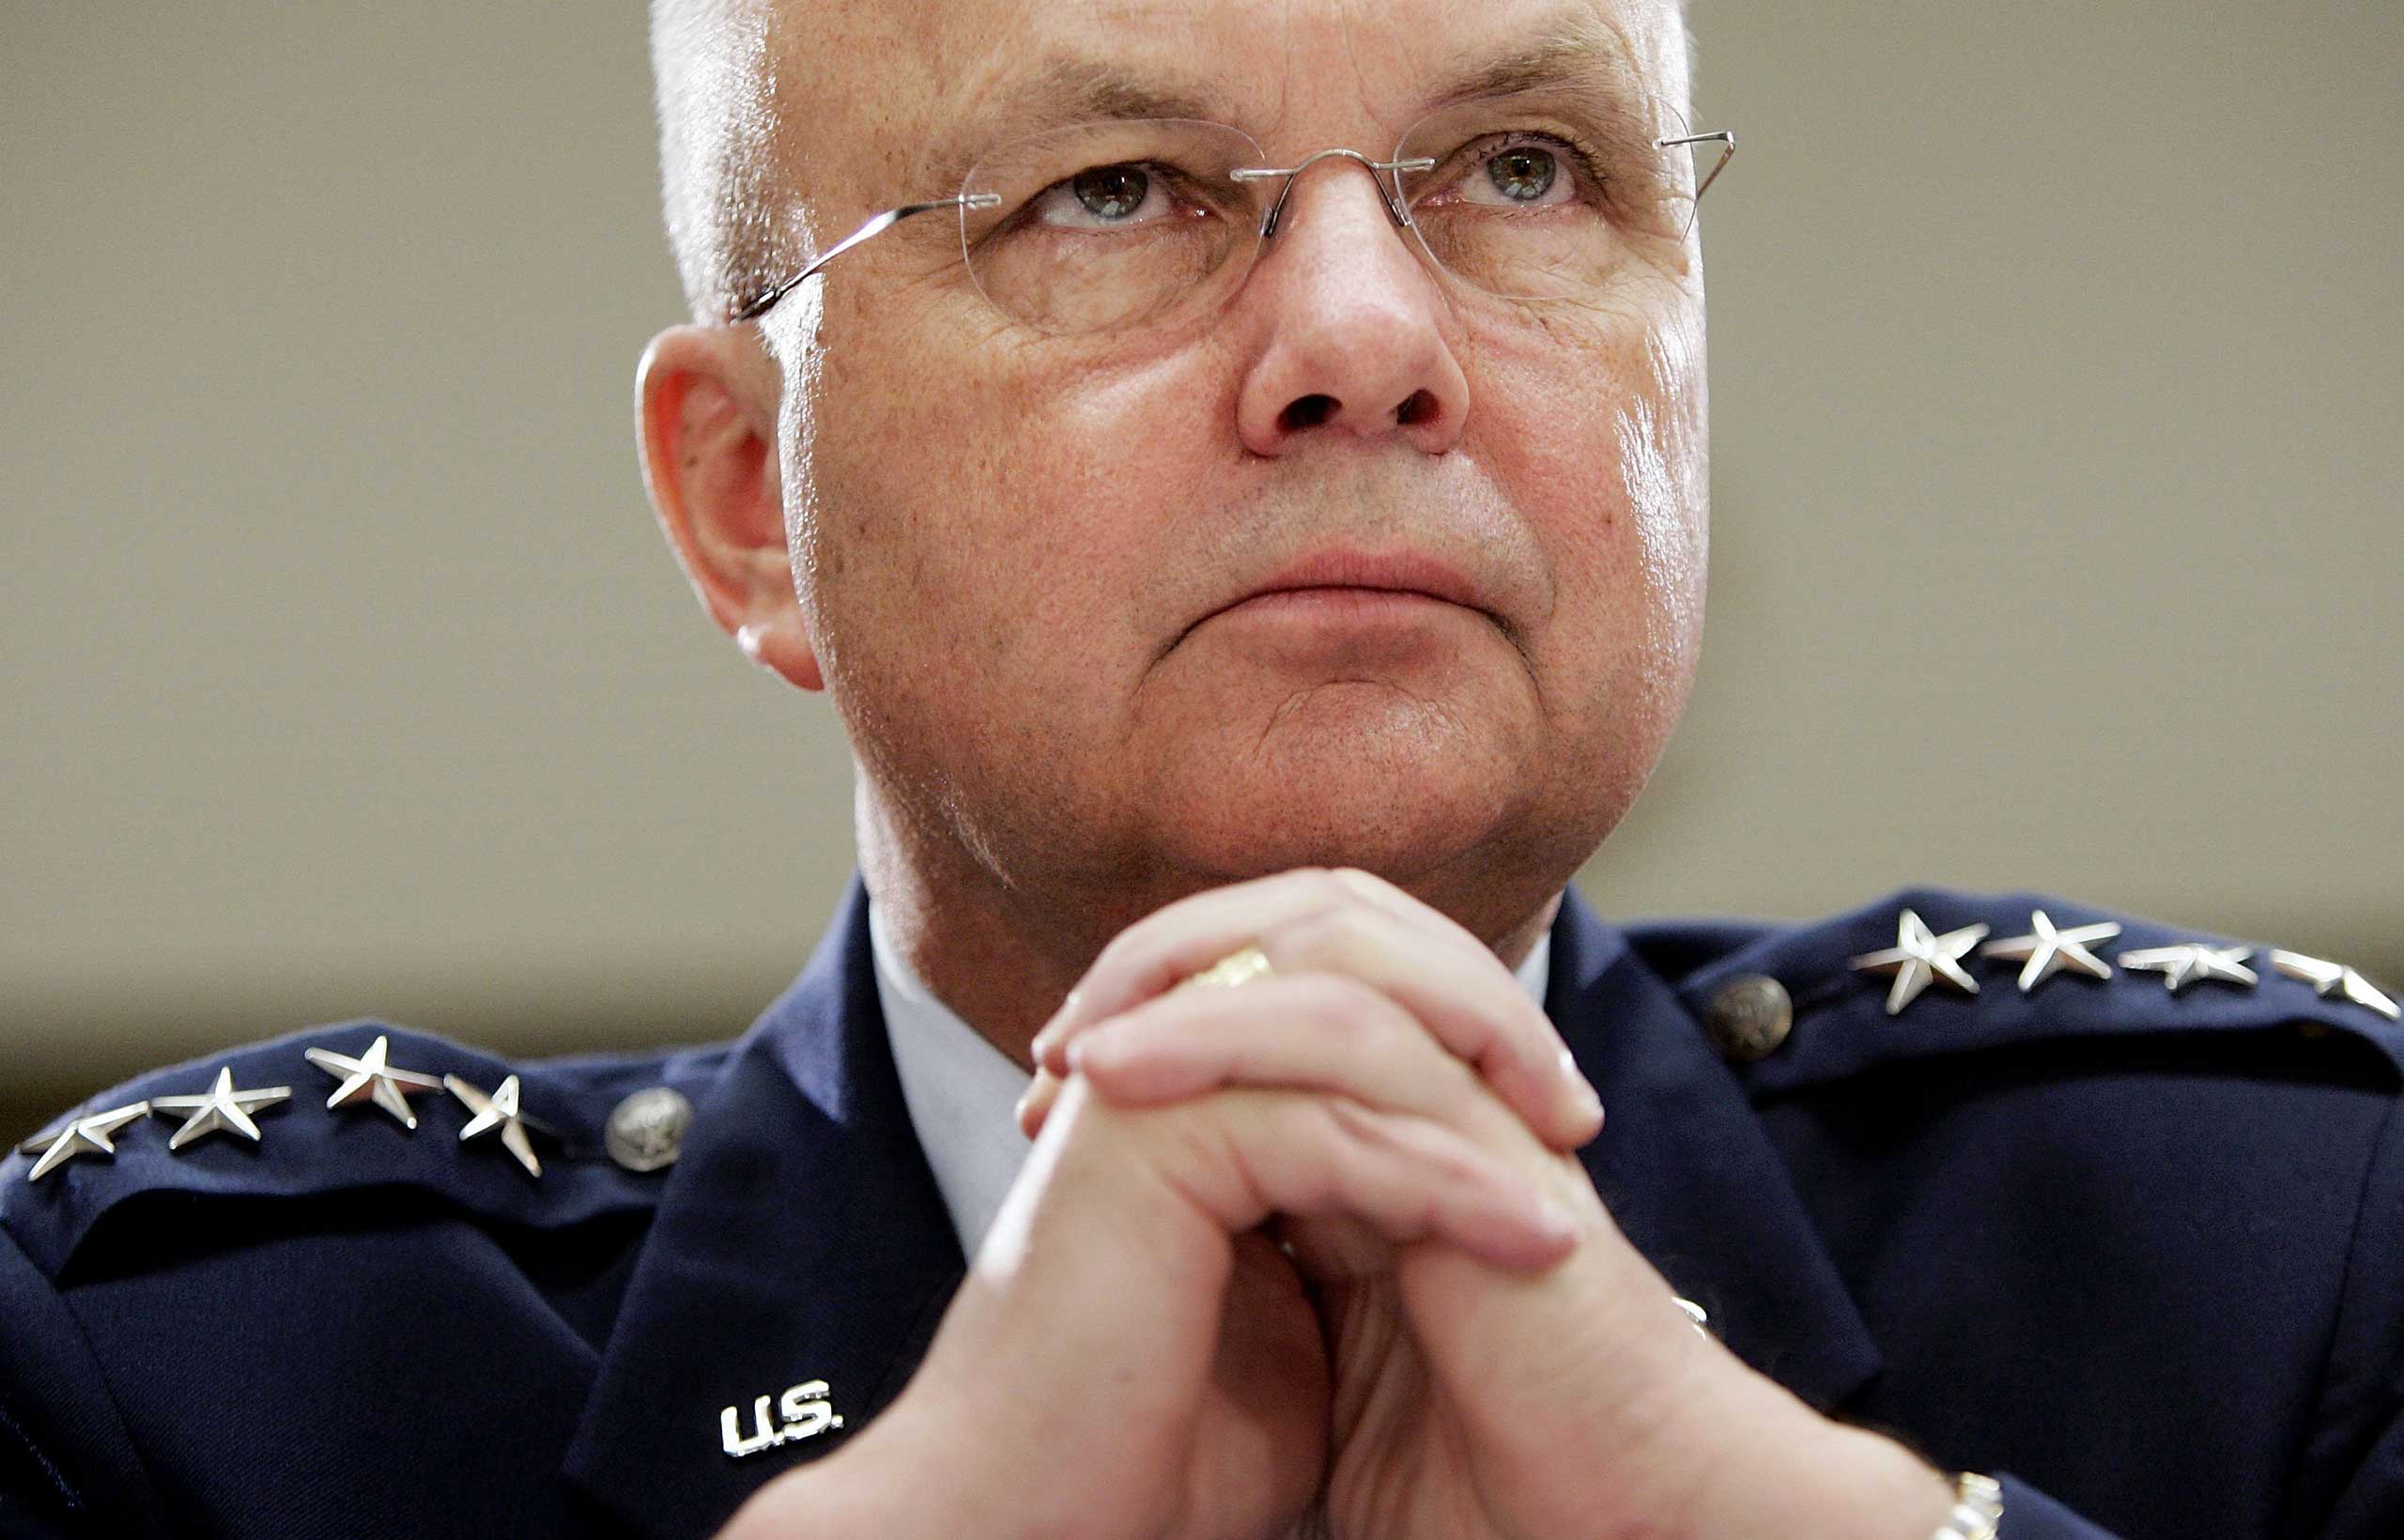 Central Intelligence Agency Director Michael Hayden listens to questioning during a hearing before the House Intelligence Committee on Capitol Hill in Washington, Jan. 18, 2007. (Win McNamee—Getty Images)